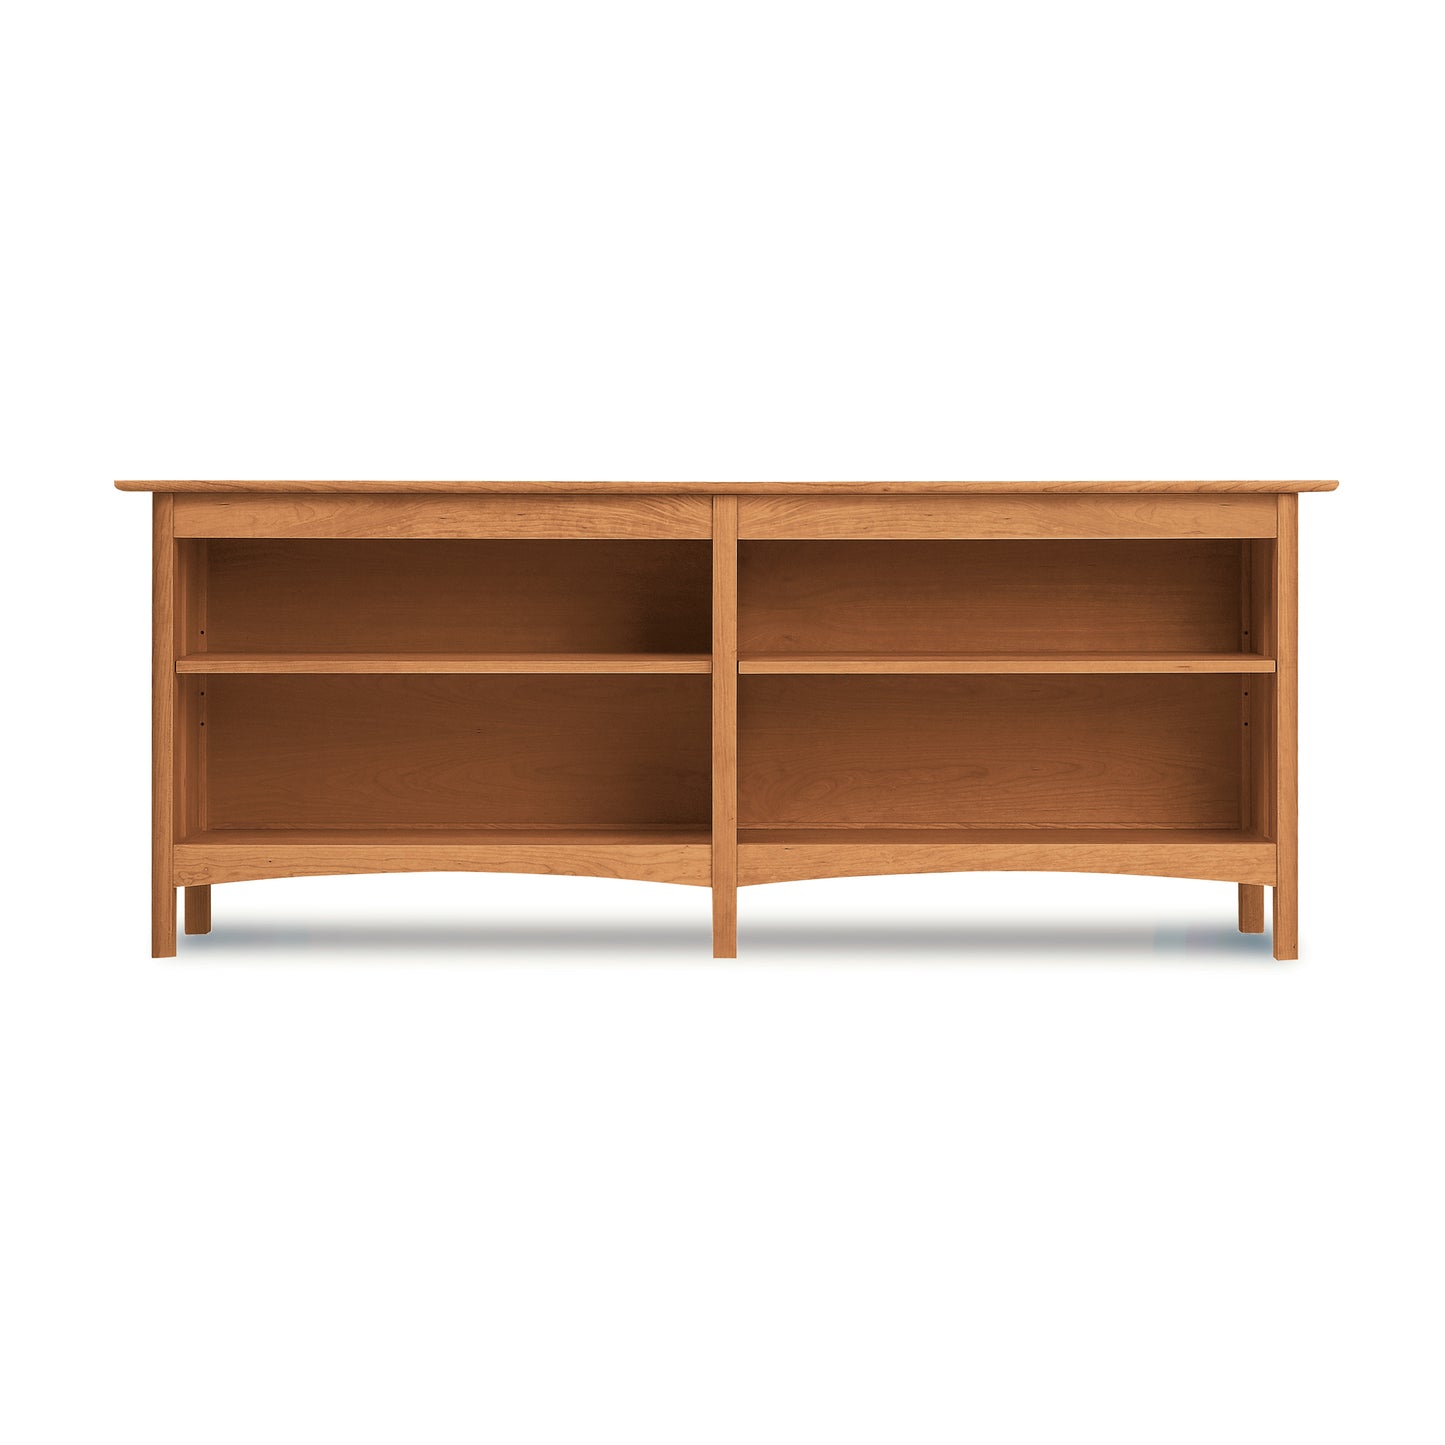 A Heartwood Shaker Open Console Bookcase with open shelving, isolated on a white background by Vermont Furniture Designs.